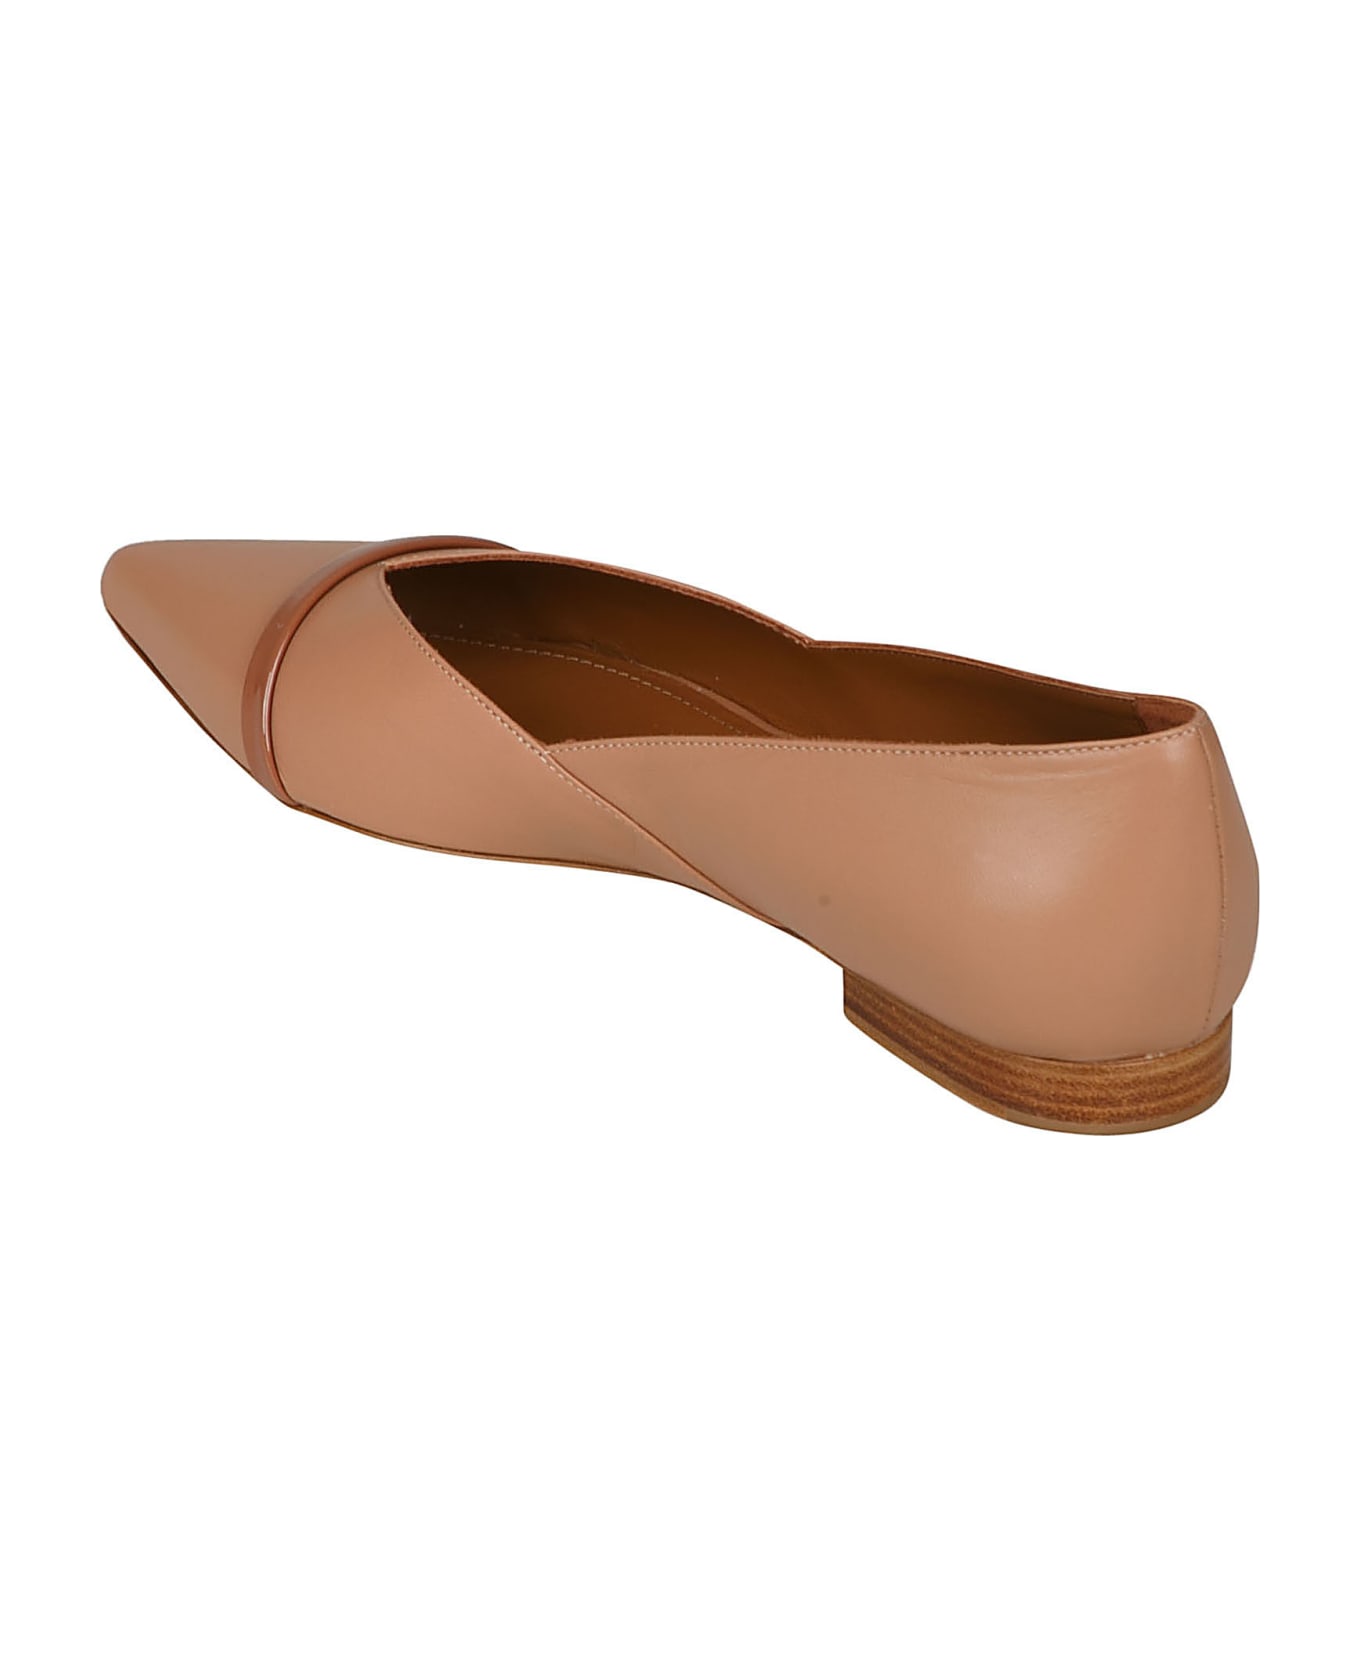 Malone Souliers Pumps - Nude